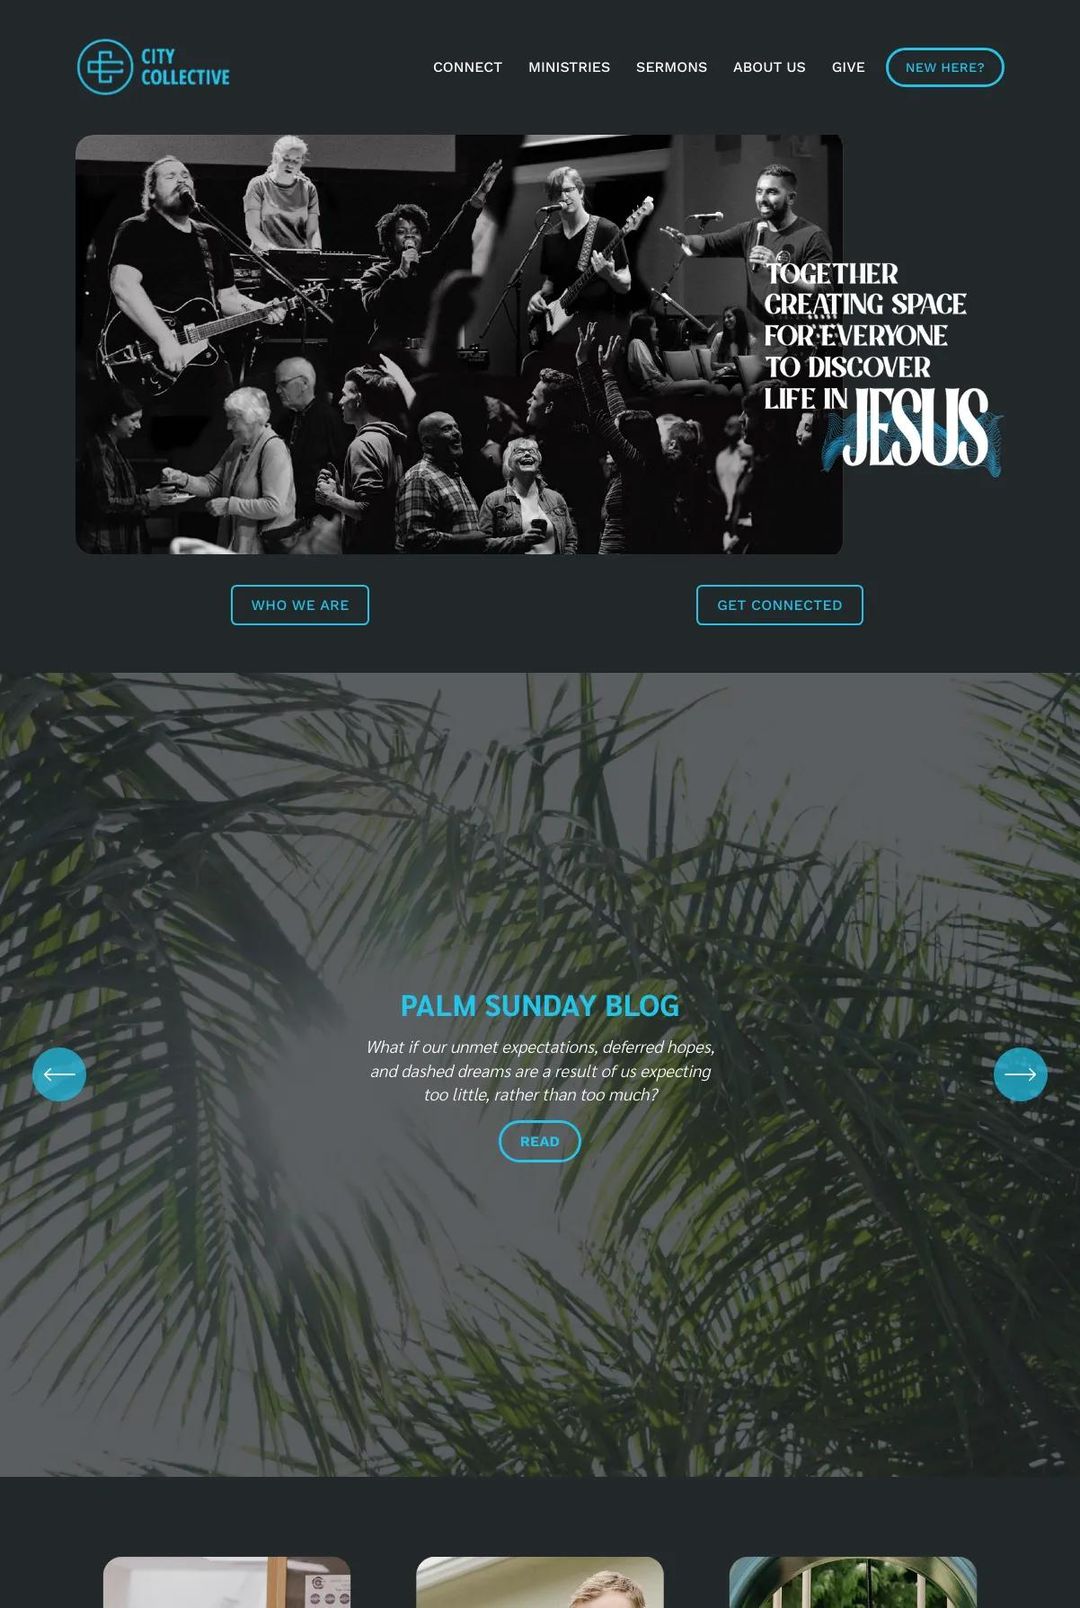 Screenshot 1 of City Collective Church (Example Squarespace Church Website)